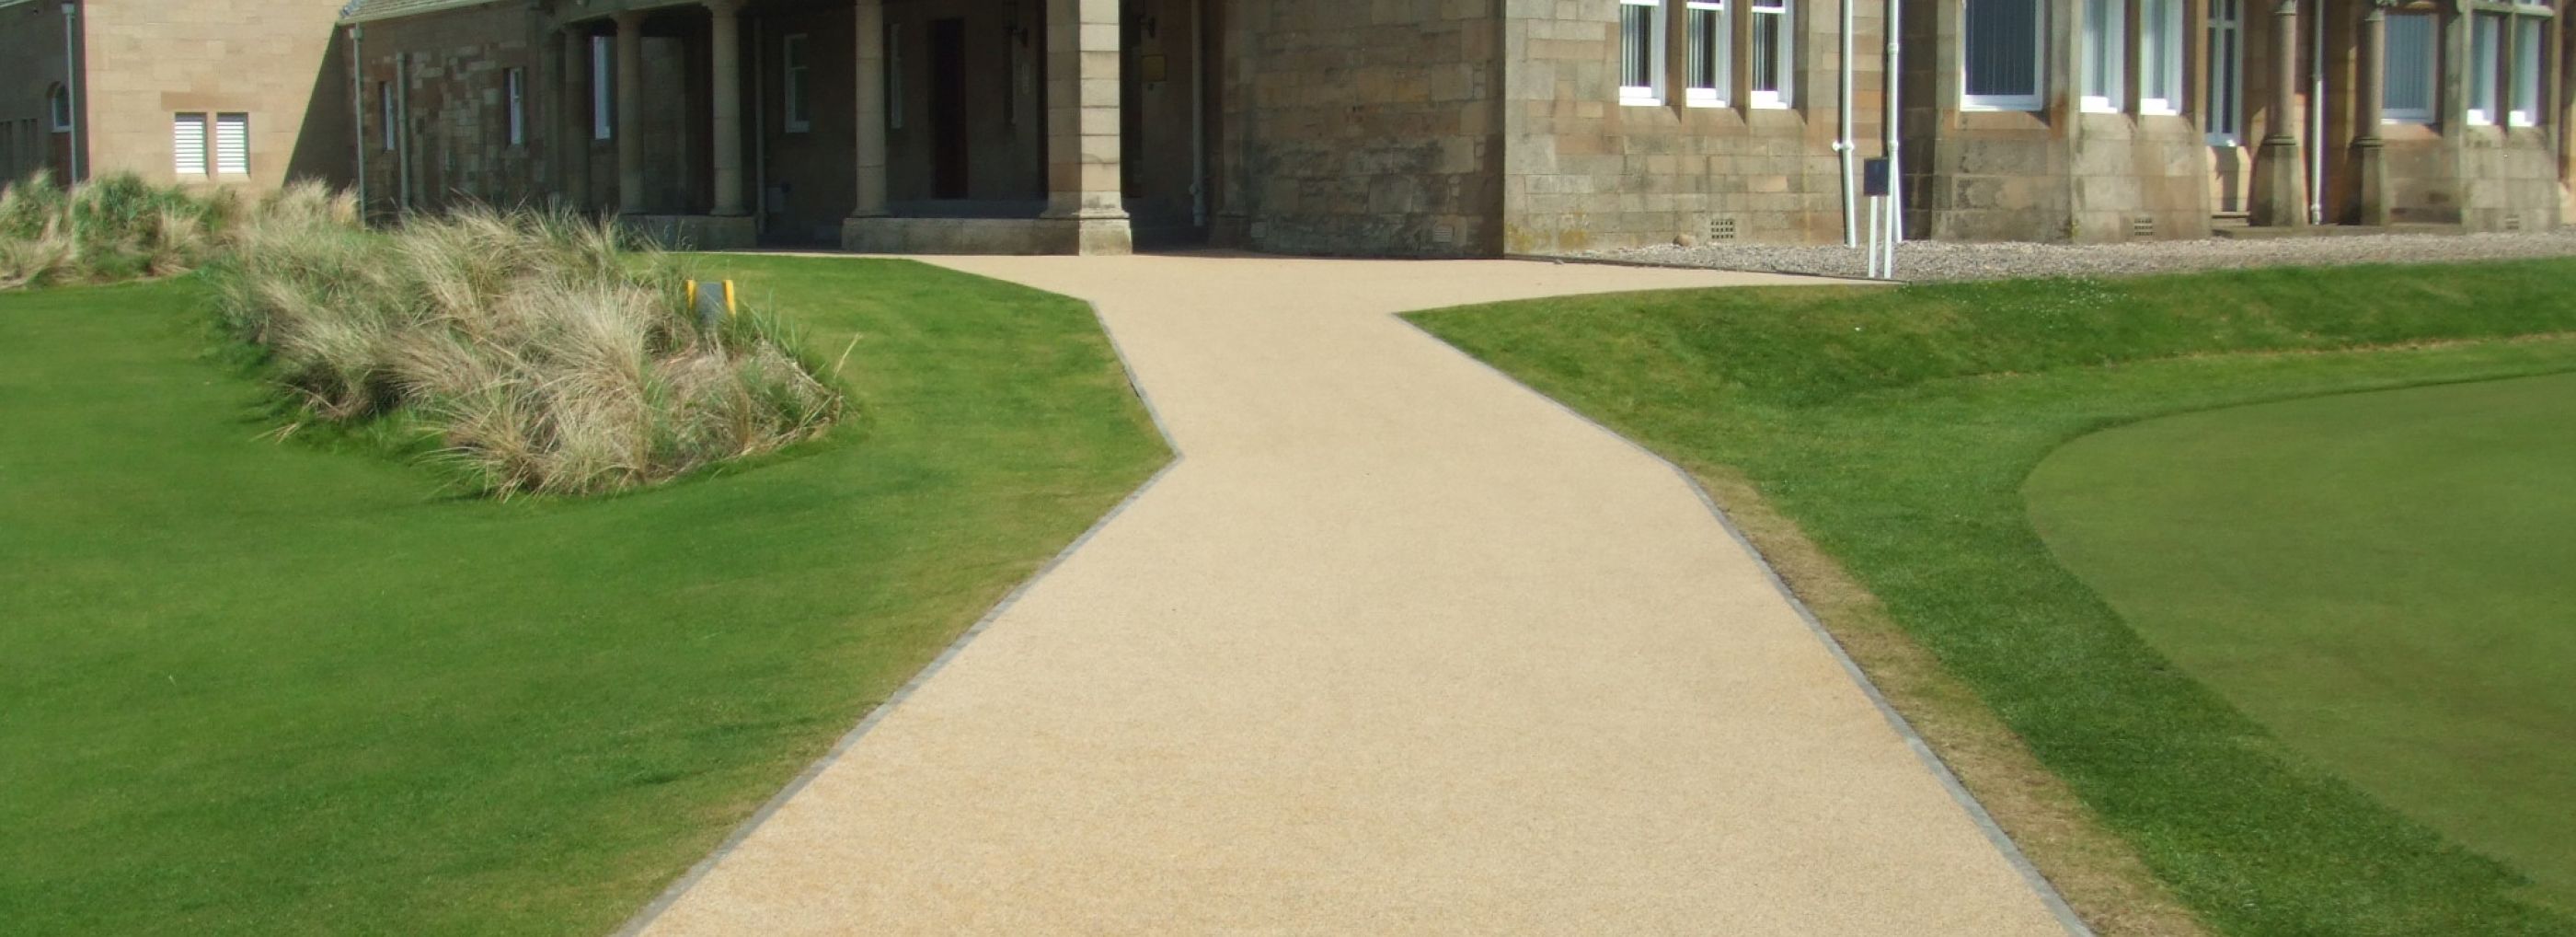 Rubber walkway path towards a grand stone building.